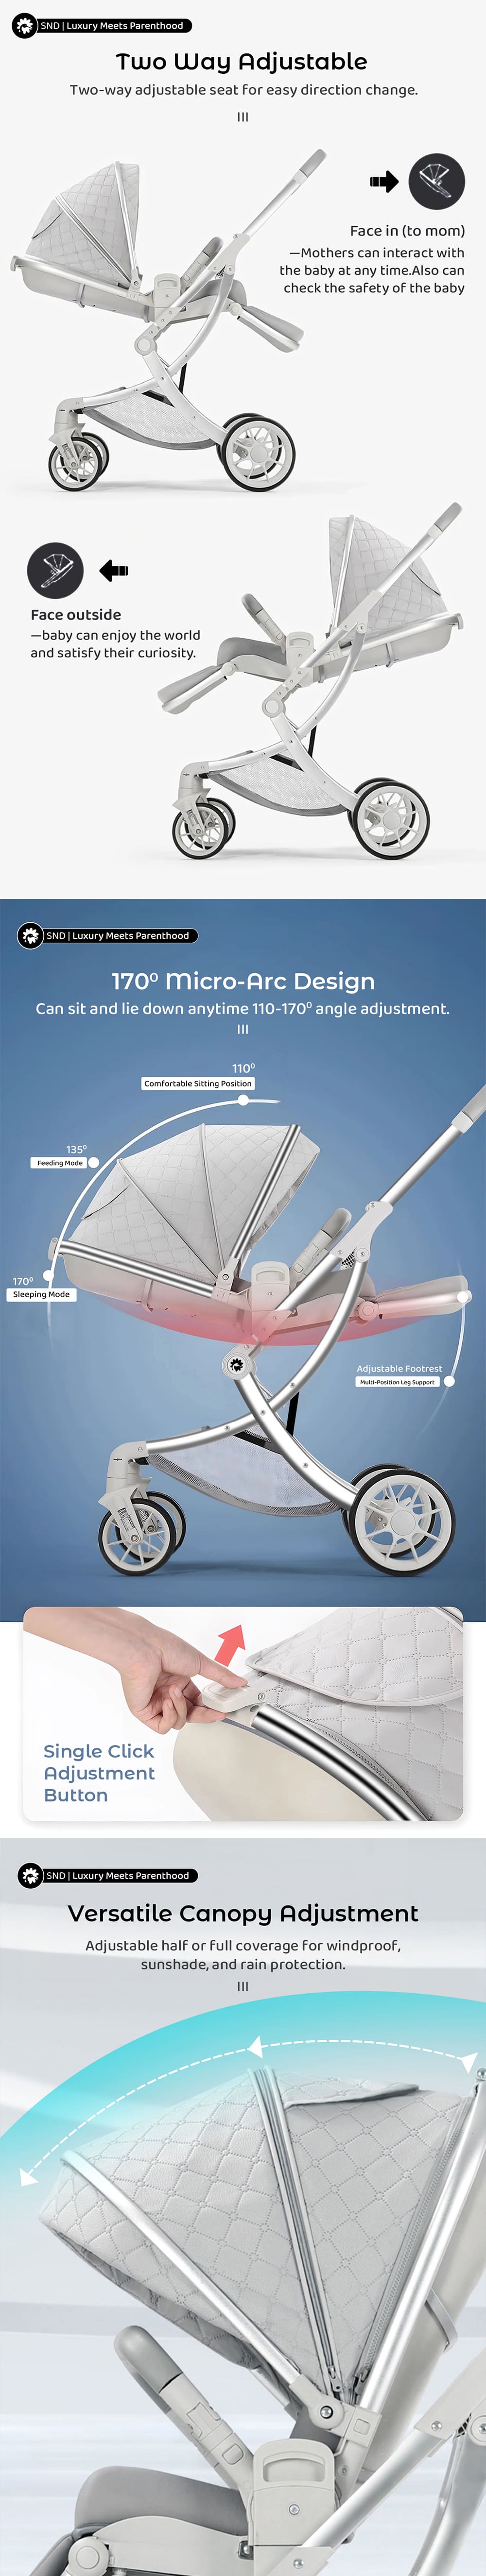 Reclinable Baby Stroller